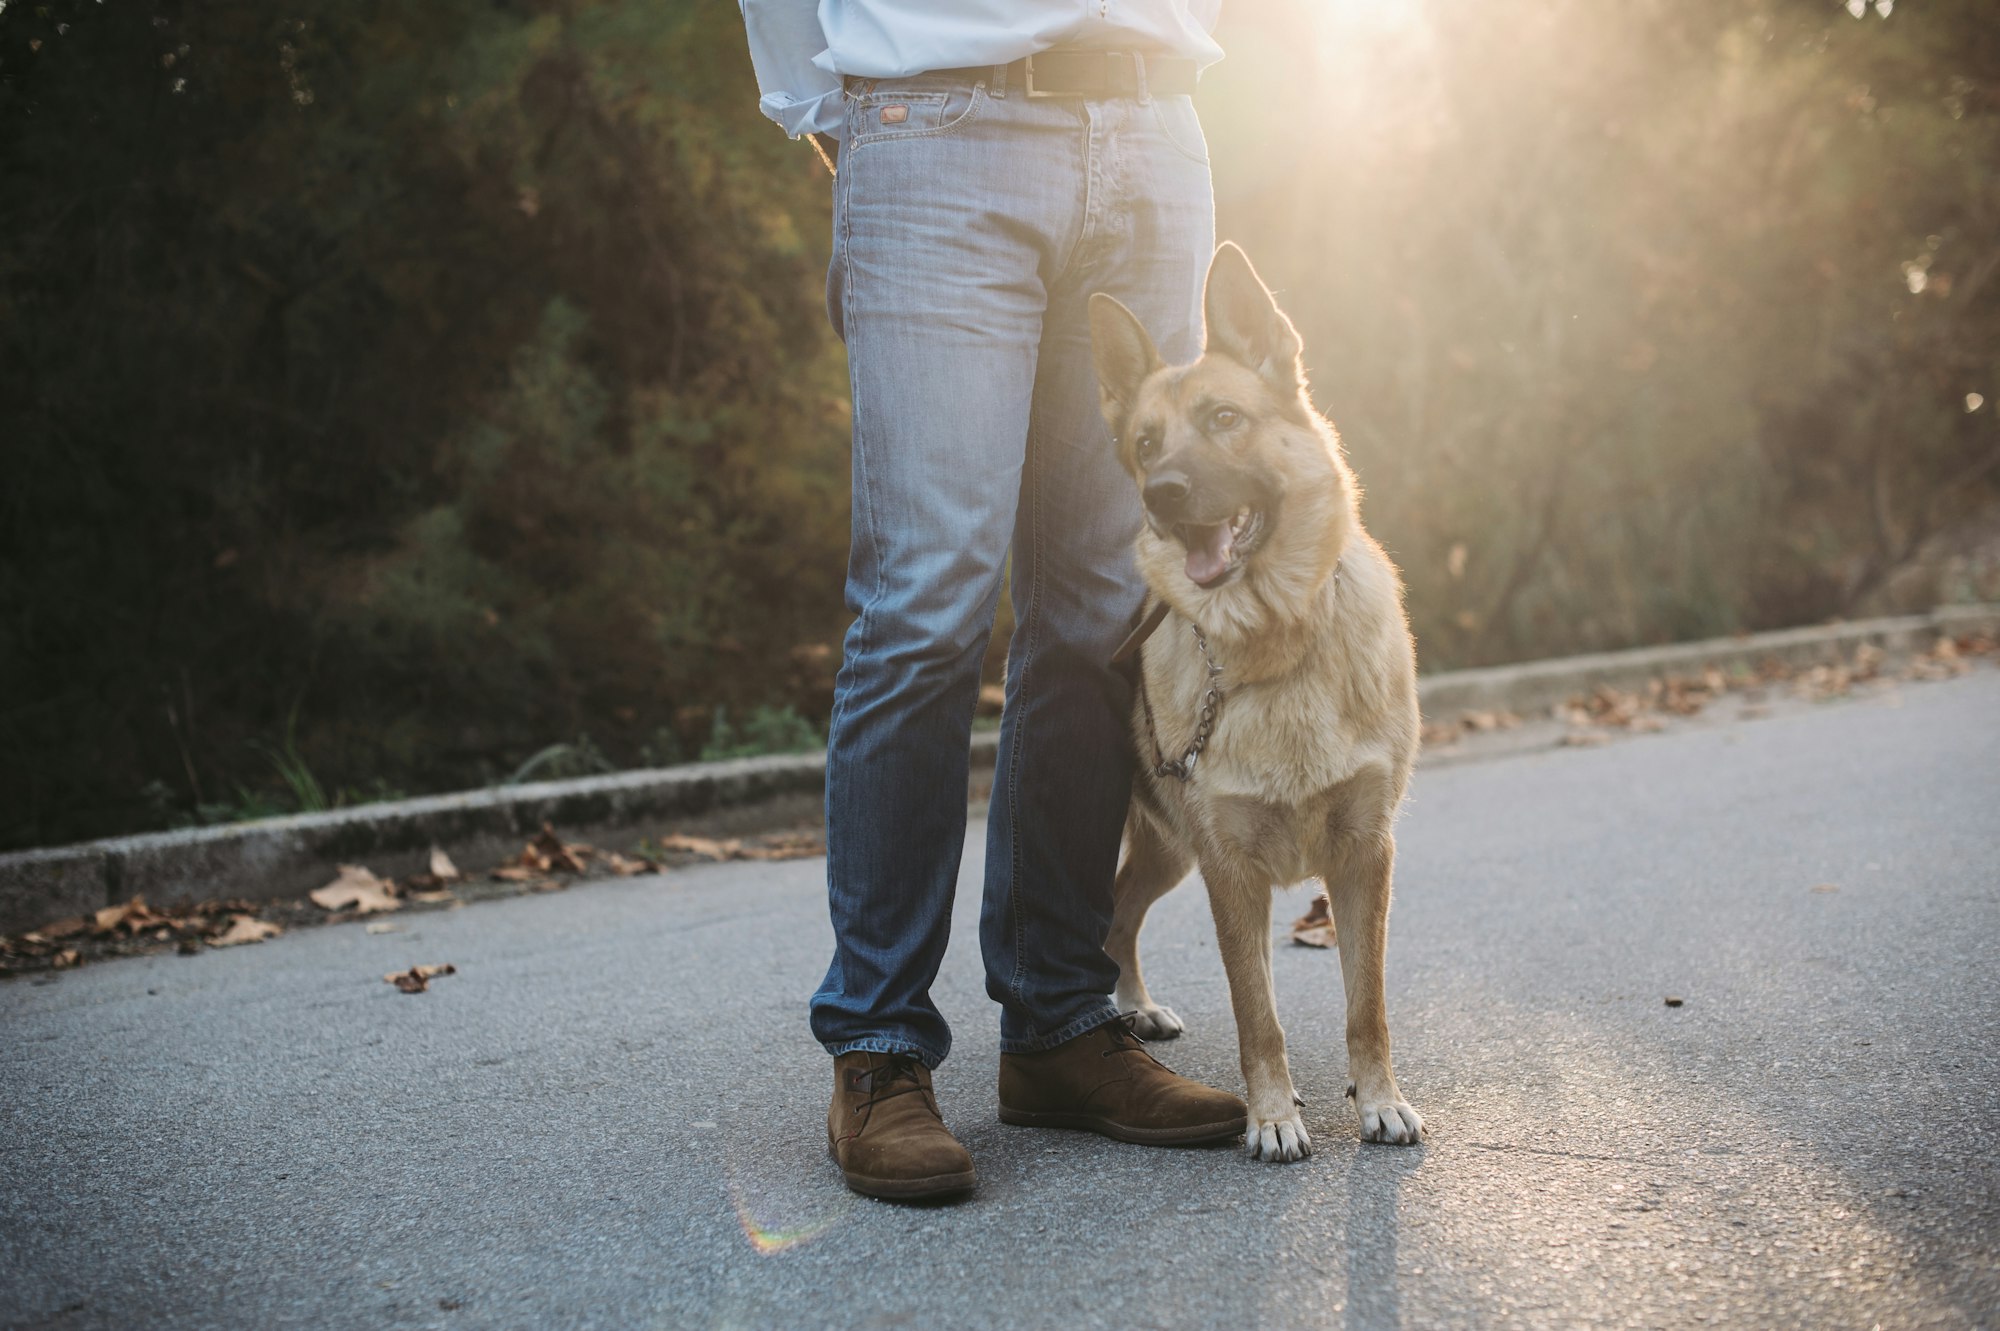 A Guide to Dog Behavior: Why Does My Dog Stand On Me?